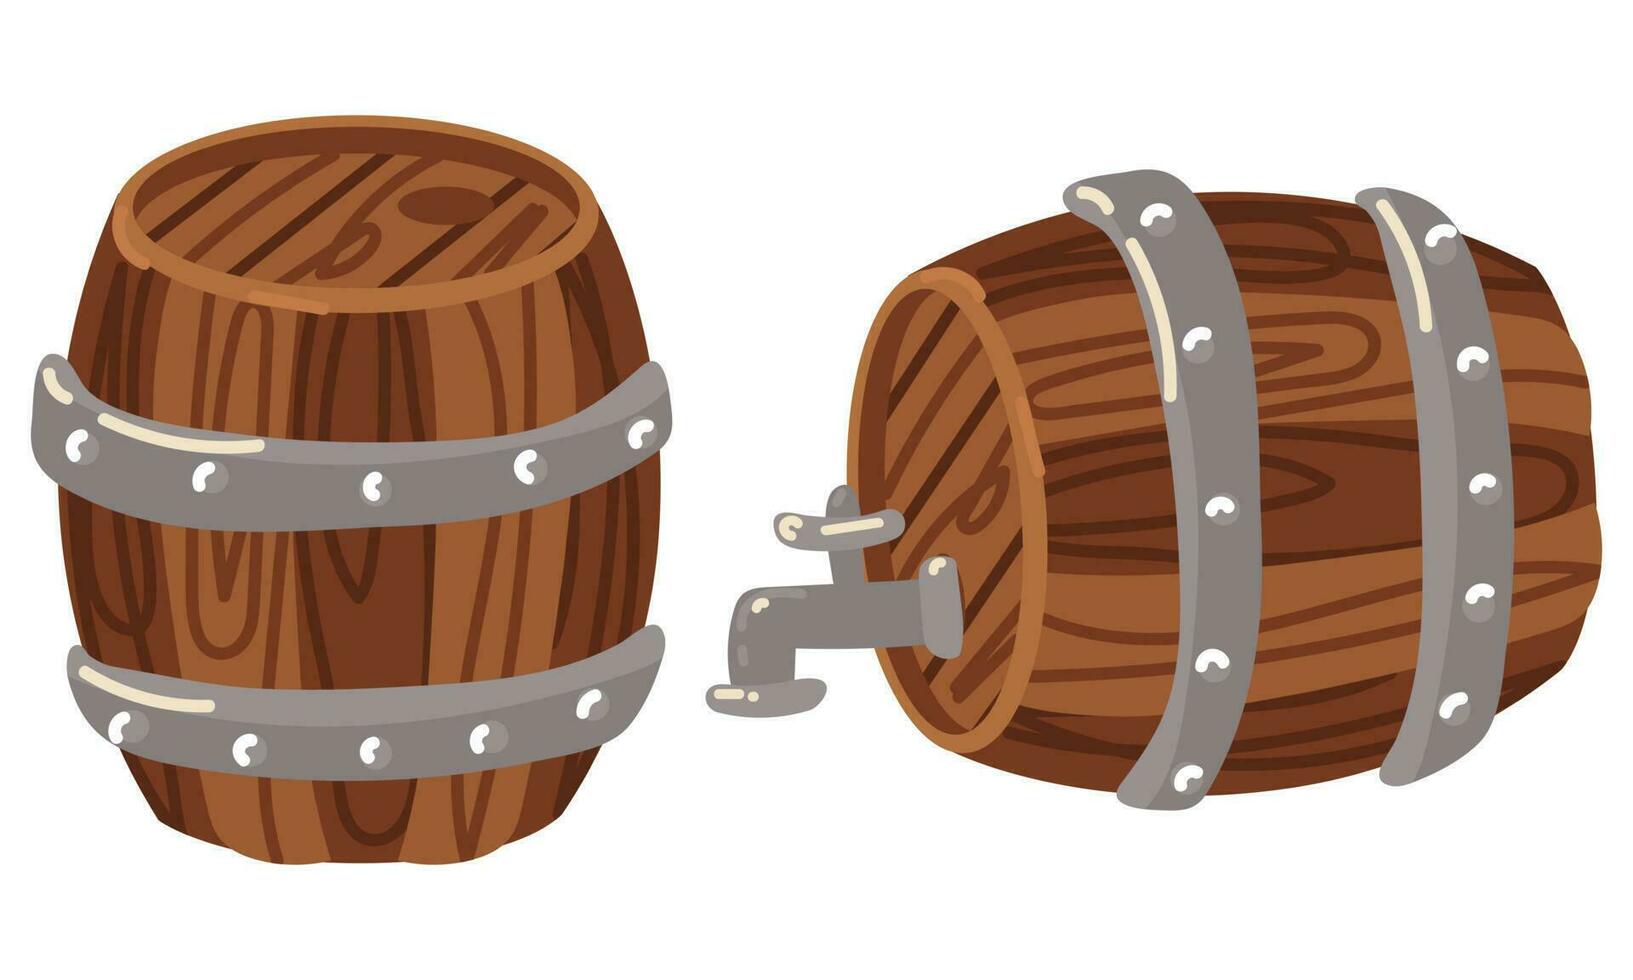 A set of wooden barrels for beer, wine, whiskey. Oak board containers with taps and stoppers brown containers for storing liquids convenient storage. Traditional storage in industry. Vector drink.